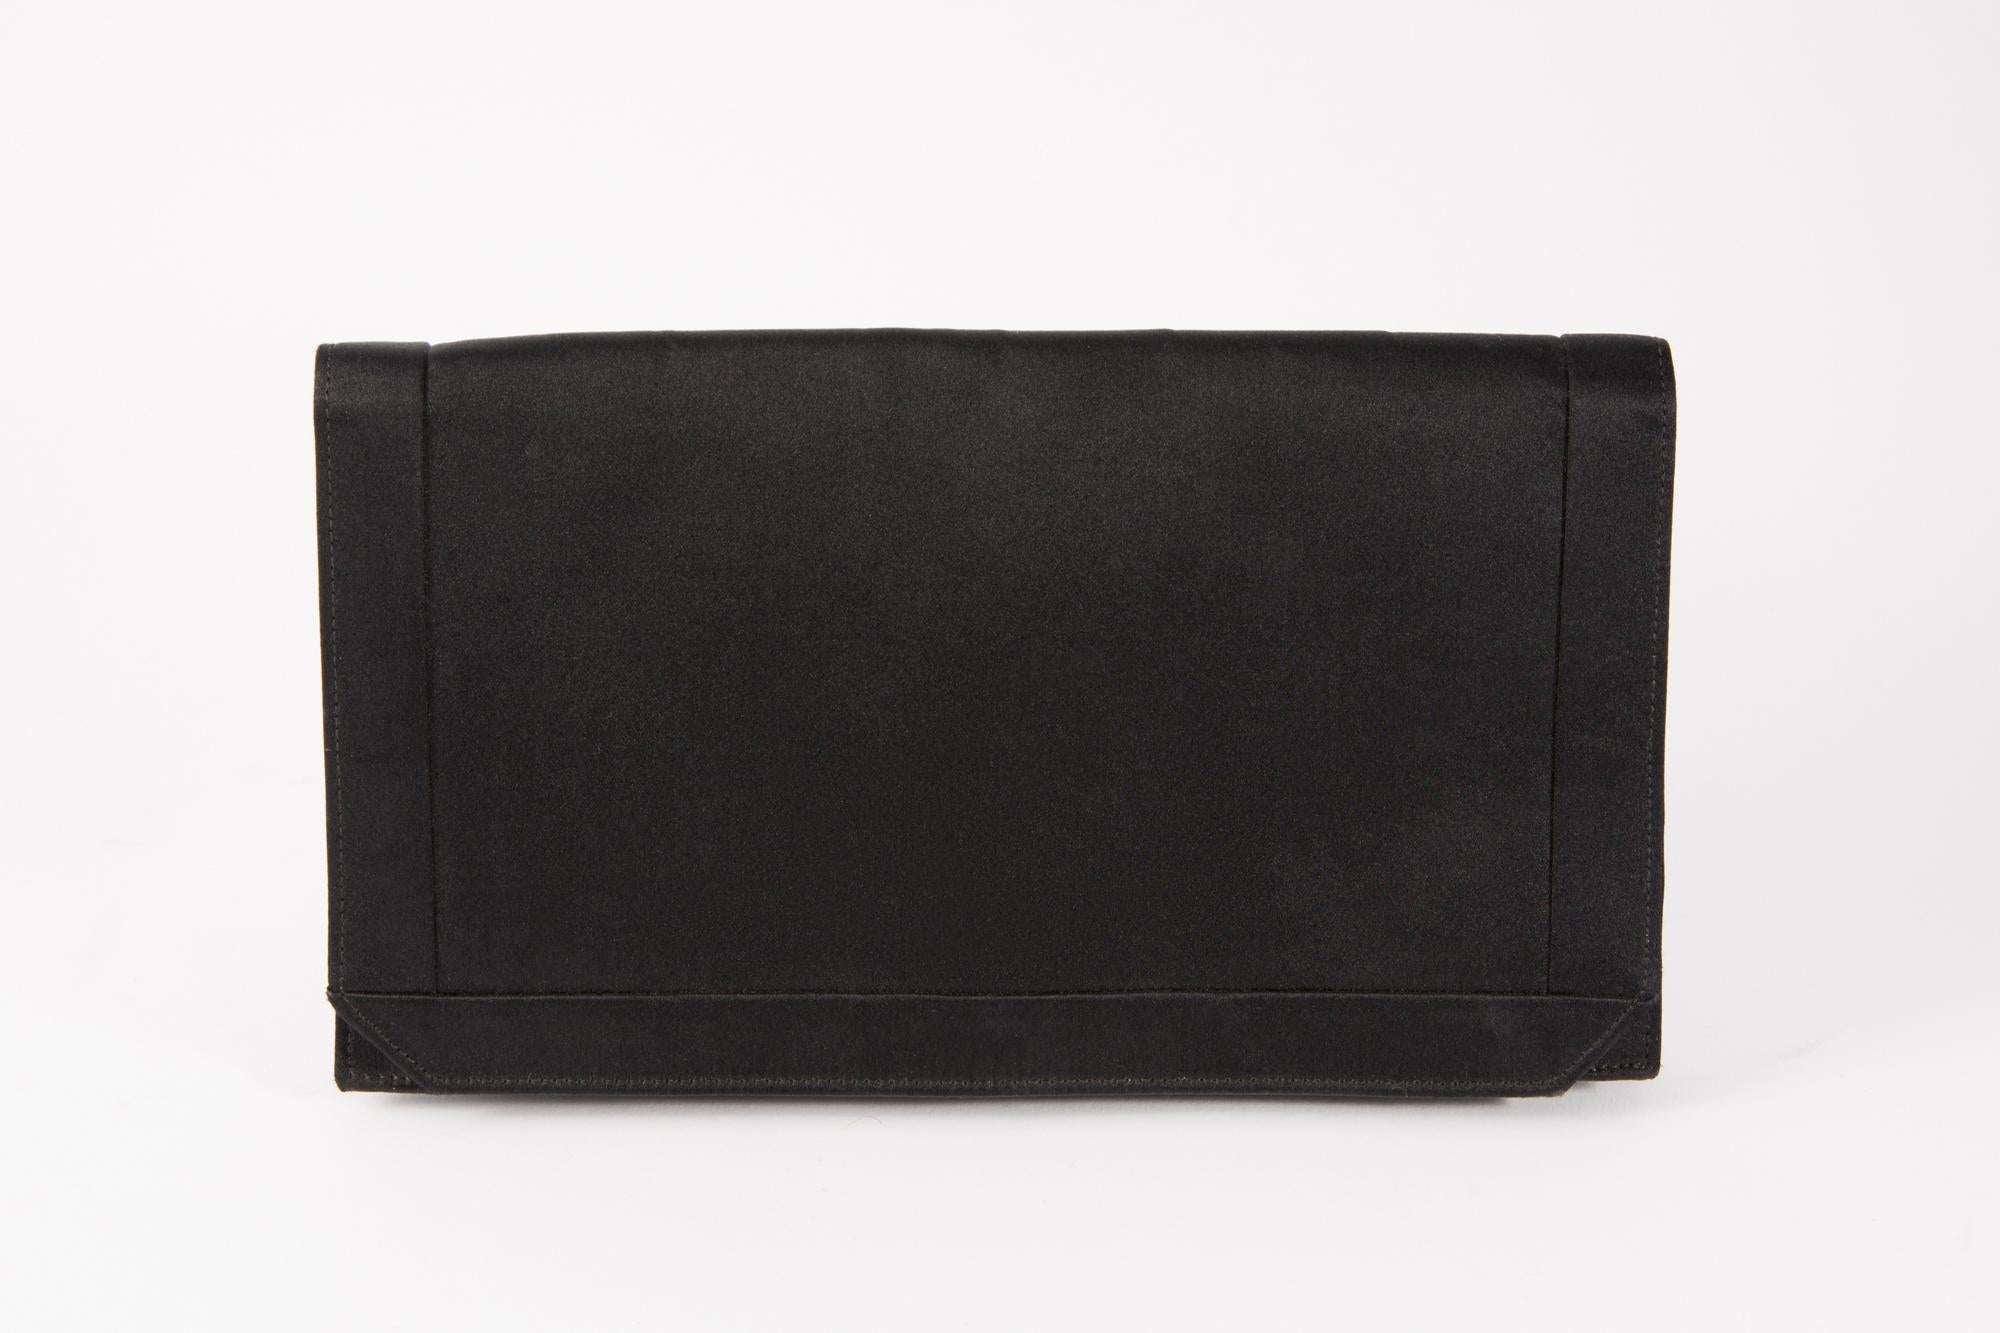 Christian Dior evening black silk clutch featuring a front snap closure, an inside stamped many compartments.  
In good vintage condition. Made in France.
Length:9.05in. (23cm)
Width 5.1in. (13cm)
 Depth 1.9in. (5cm) 
We guarantee you will receive